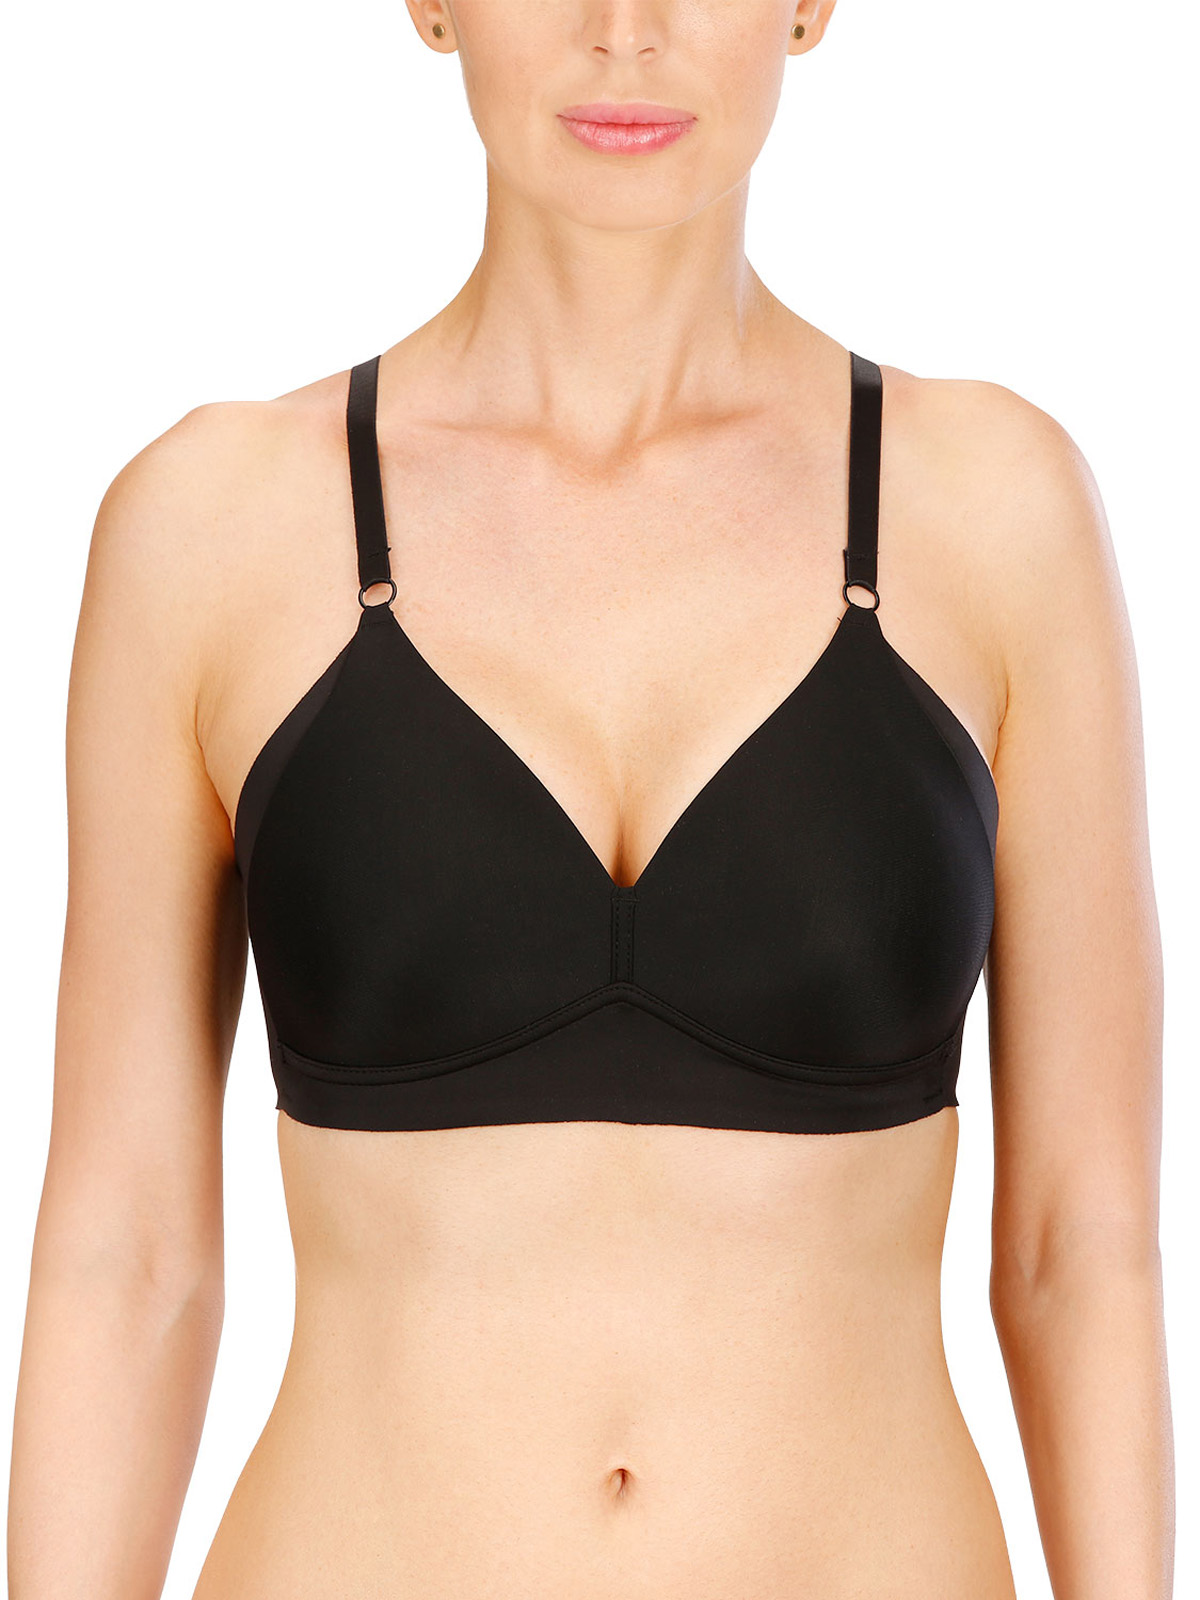 Naturana - - Naturana ASSORTED Soft Cup Non-Wired Bras - Size 34 (B cup)